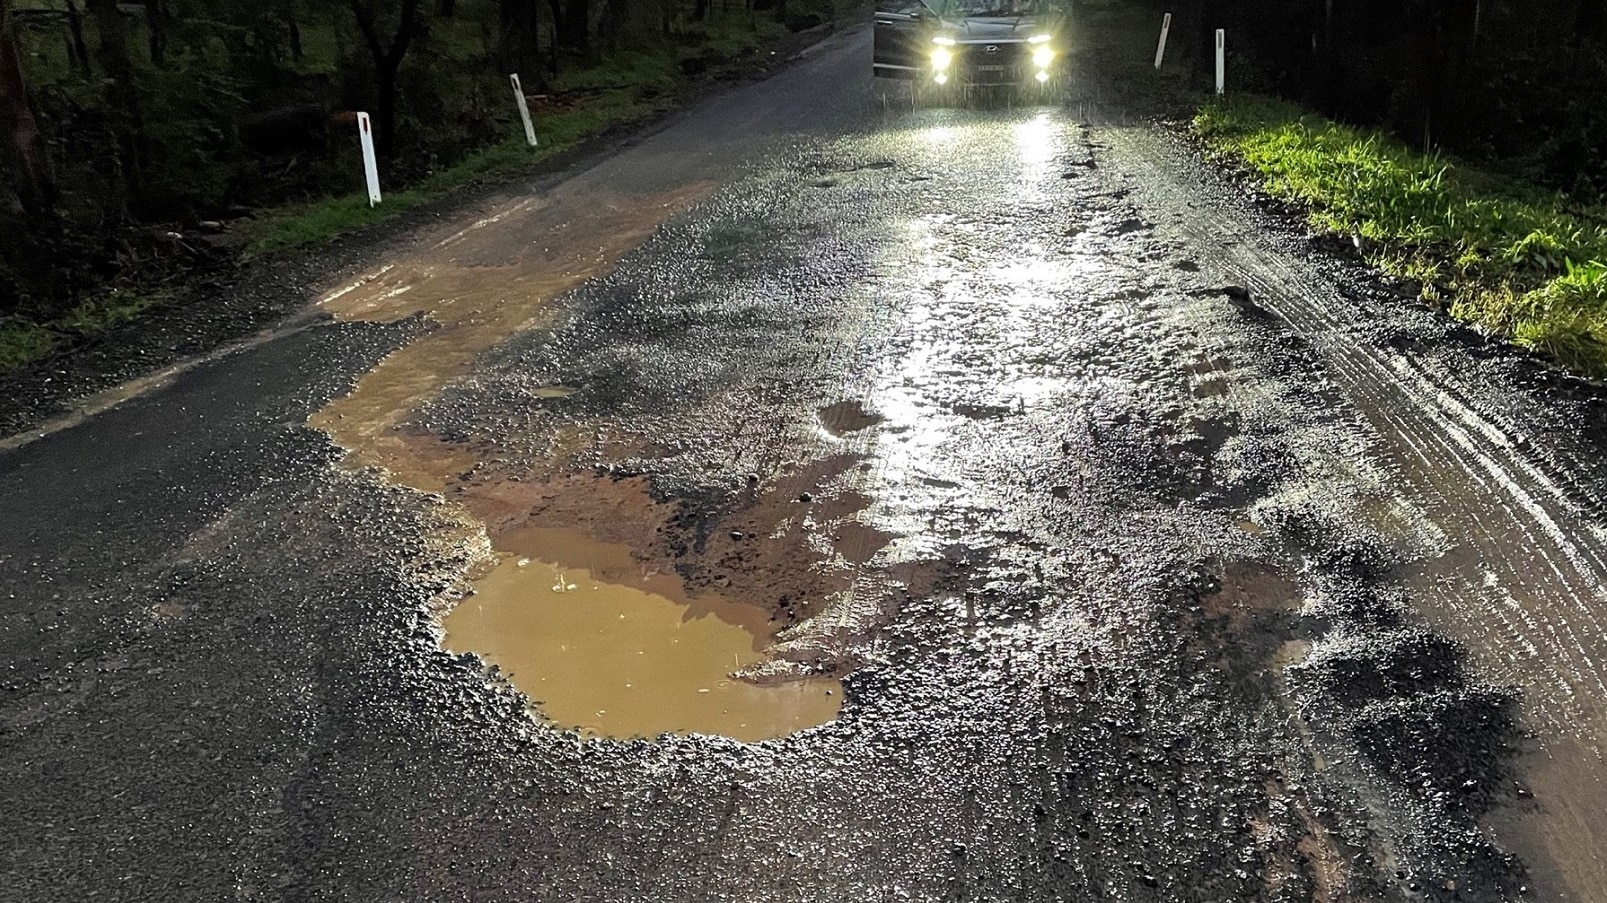 Funding for potholes not politics – new road funding research